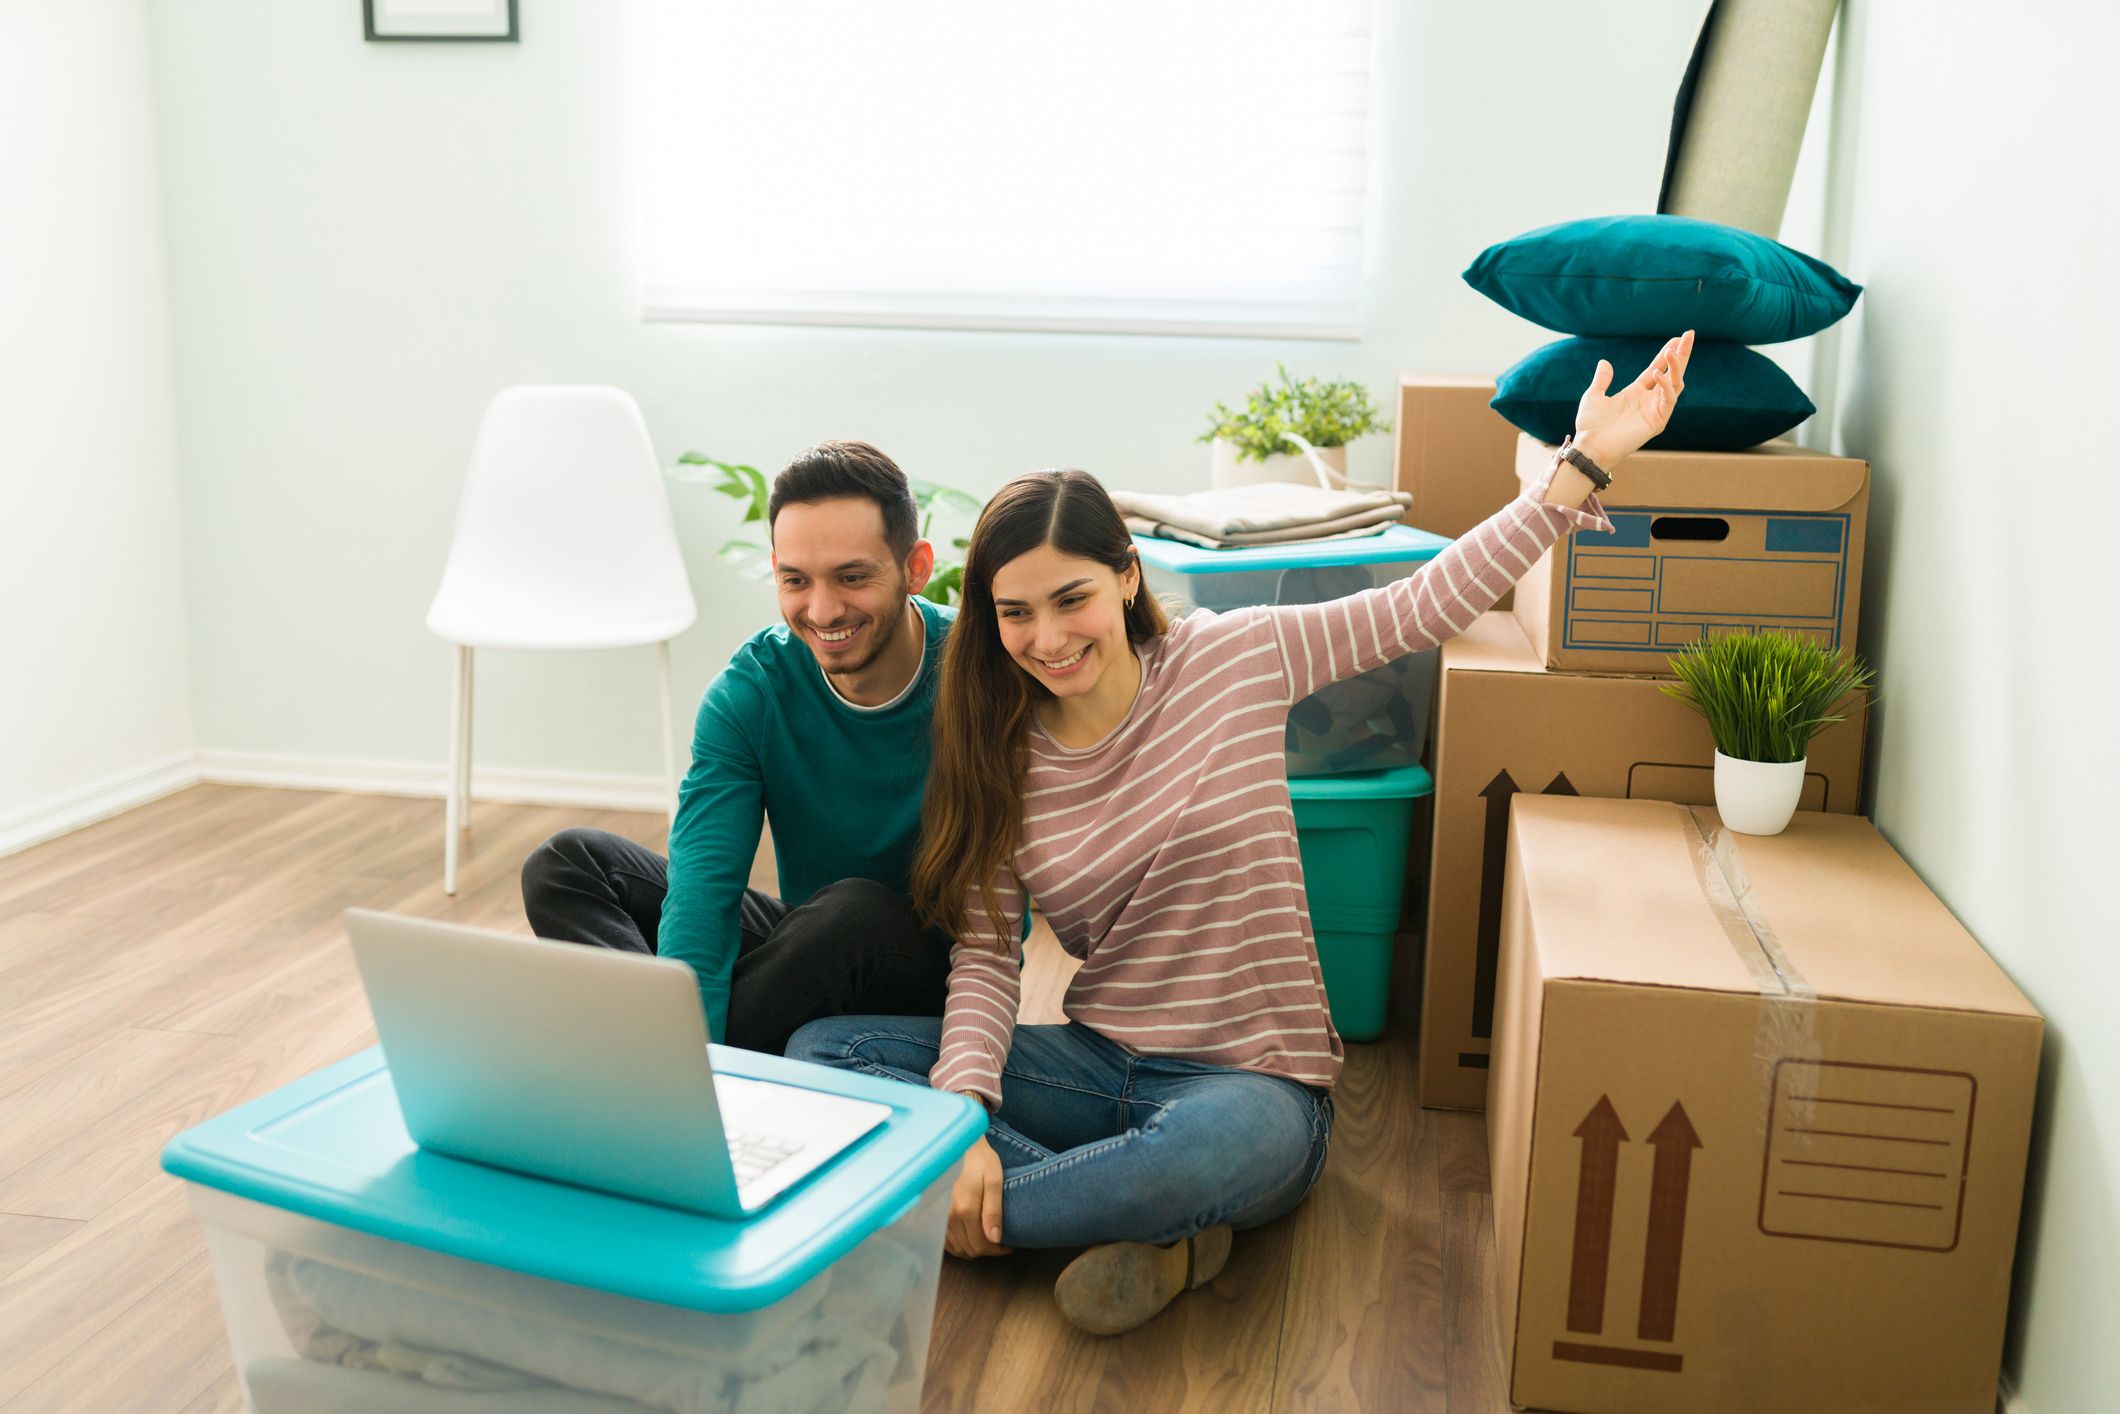 Happy newlyweds just moved into a new home. Excited couple showing their loved ones their living room with packed cardboard boxes